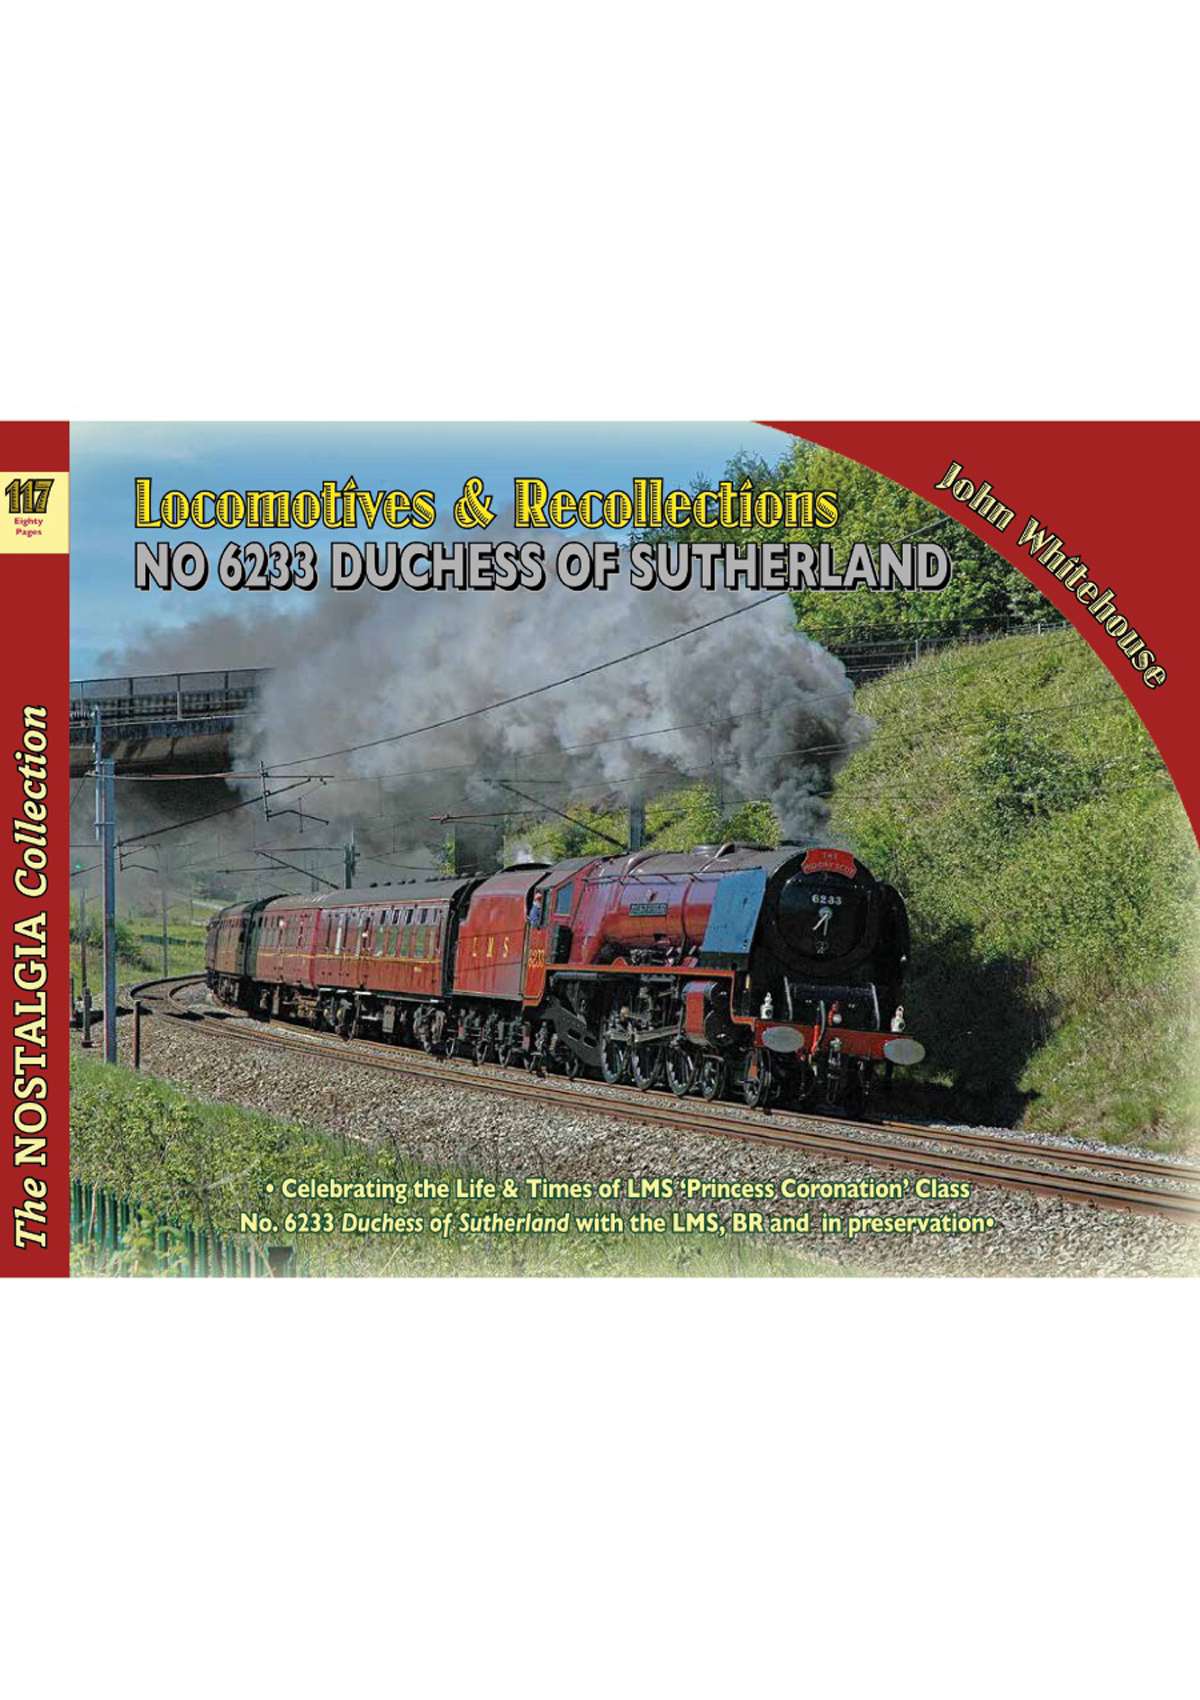 Locomotives & Recollections No 6233 Duchess of Sutherland.